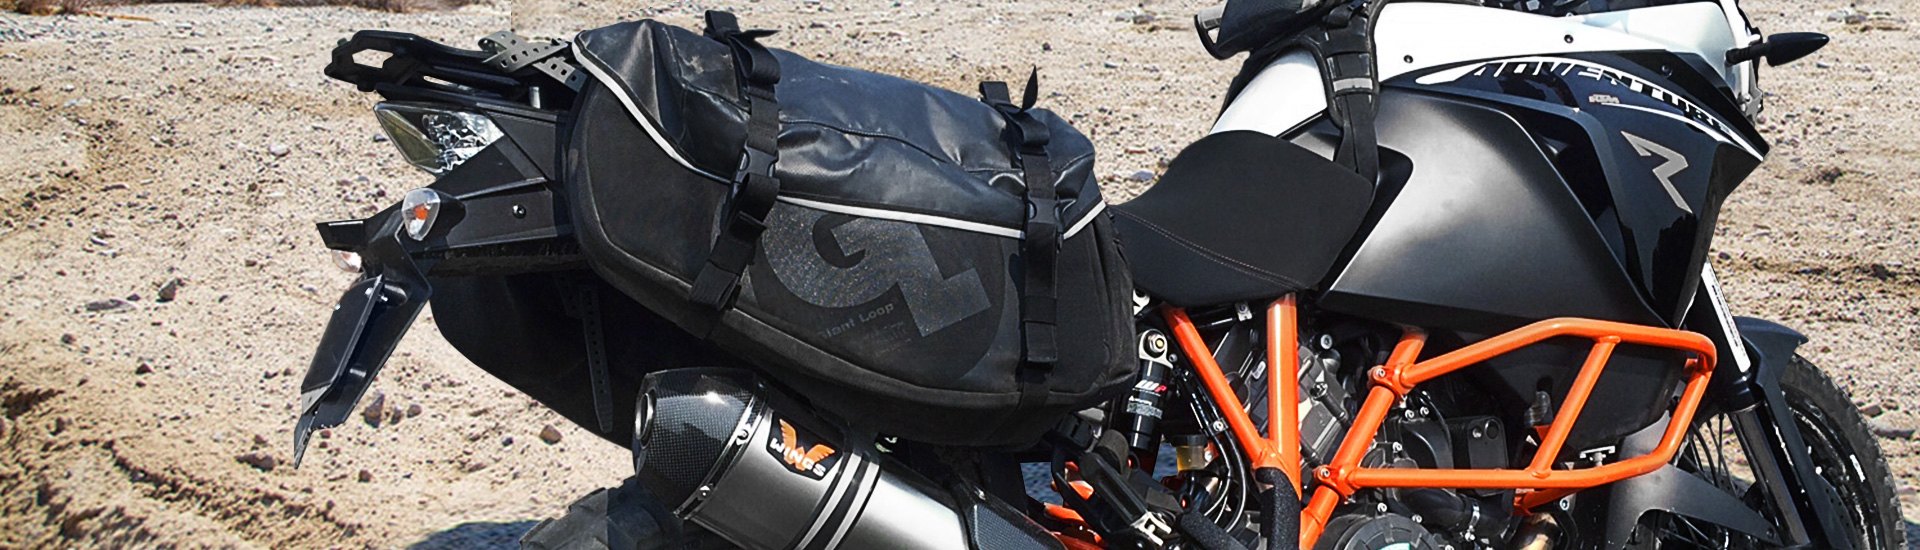 Universal Motorcycle Accessories